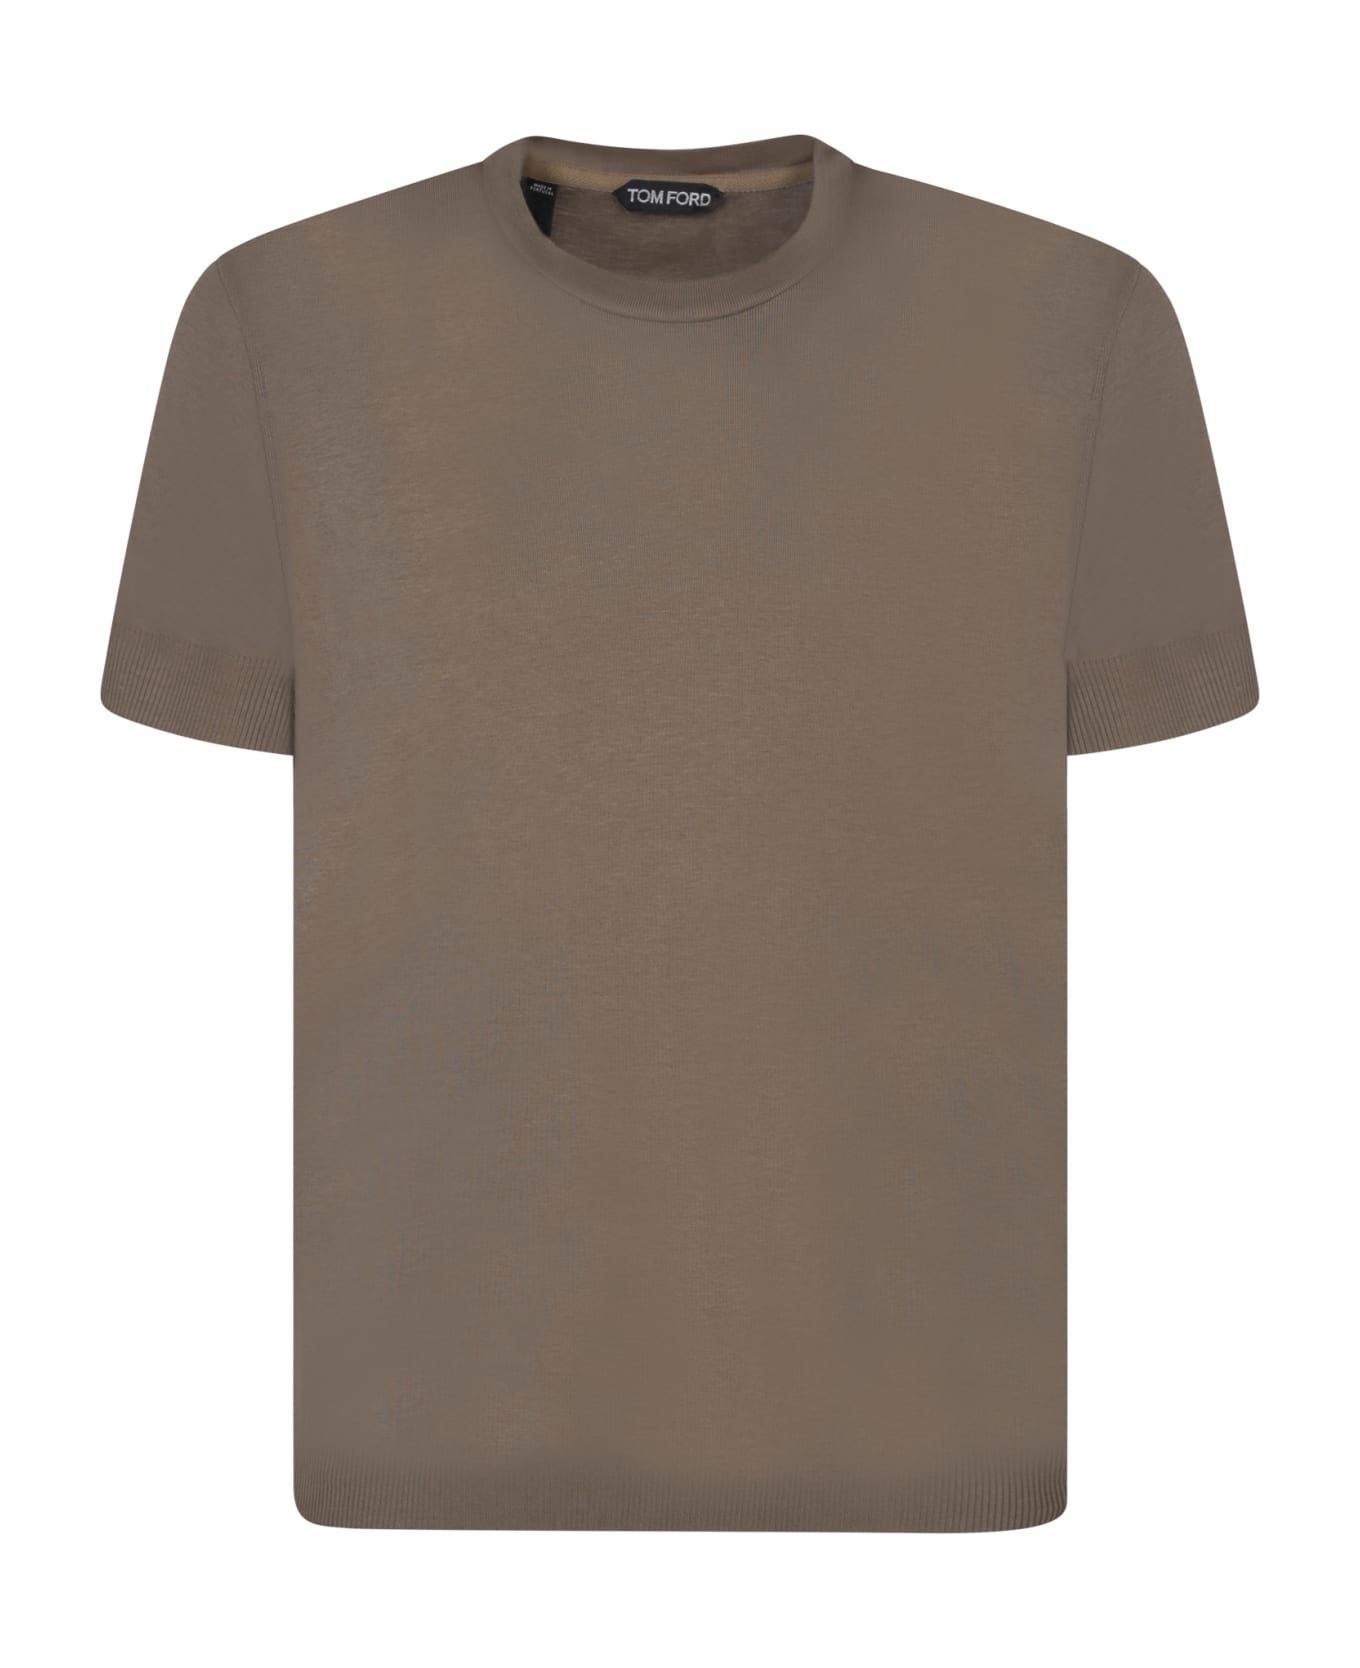 Tom Ford Ribbed Military Green T-shirt - Green シャツ